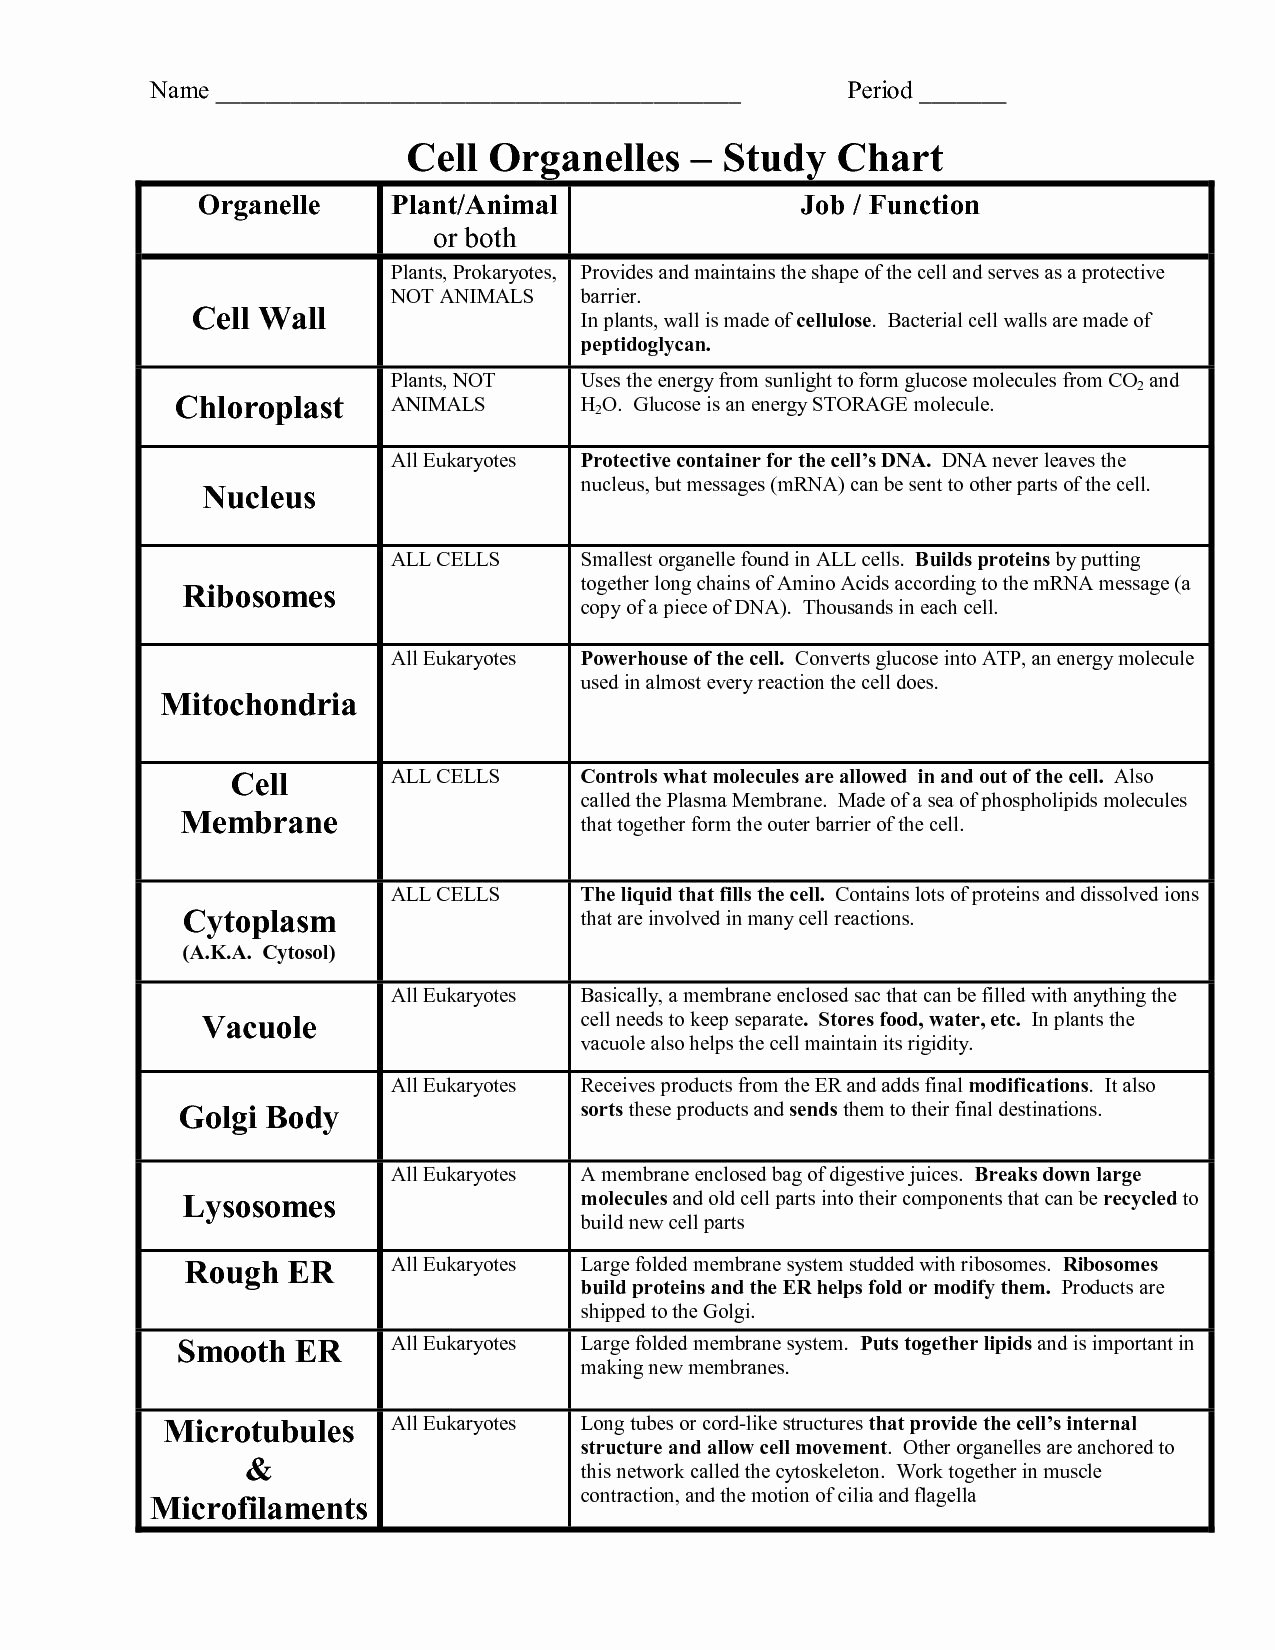 Dna Replication Worksheet Answers Awesome Structure Dna and Replication Worksheet Answers